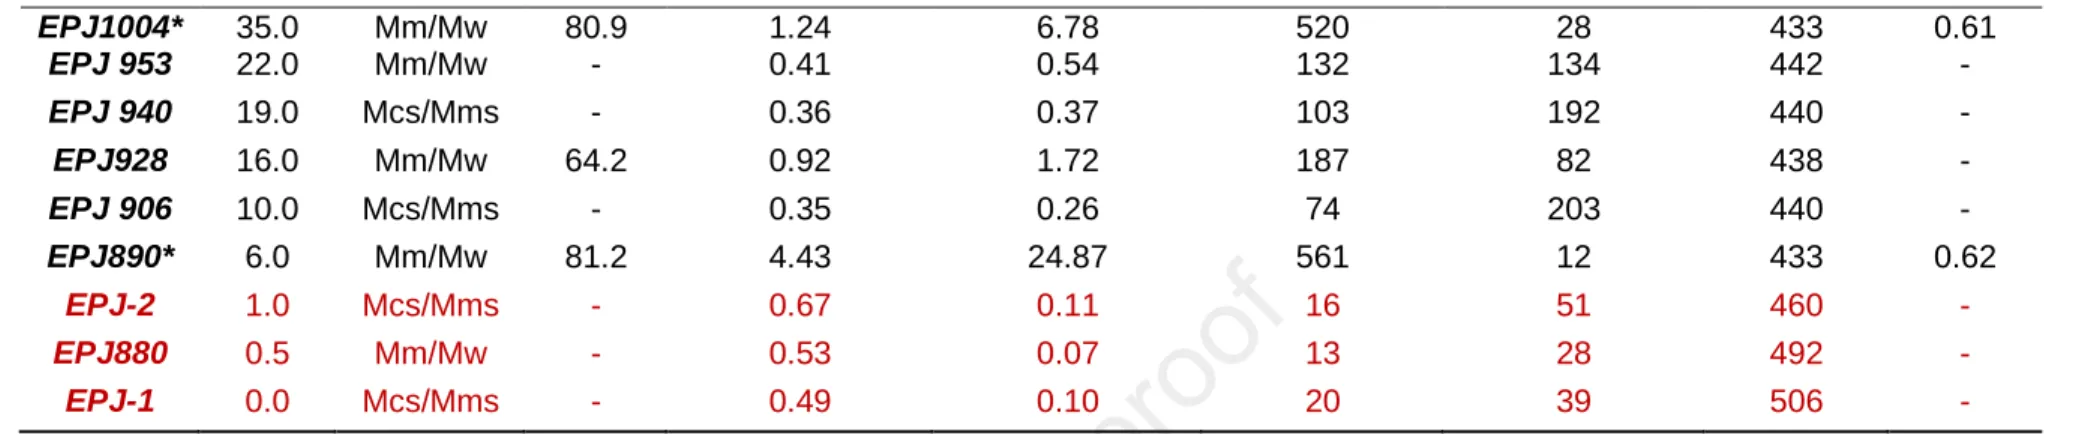 Table 2. Geochemical characteristics of the El Portón samples. Data in red are not considered in the interpretation regarding the cut-off values